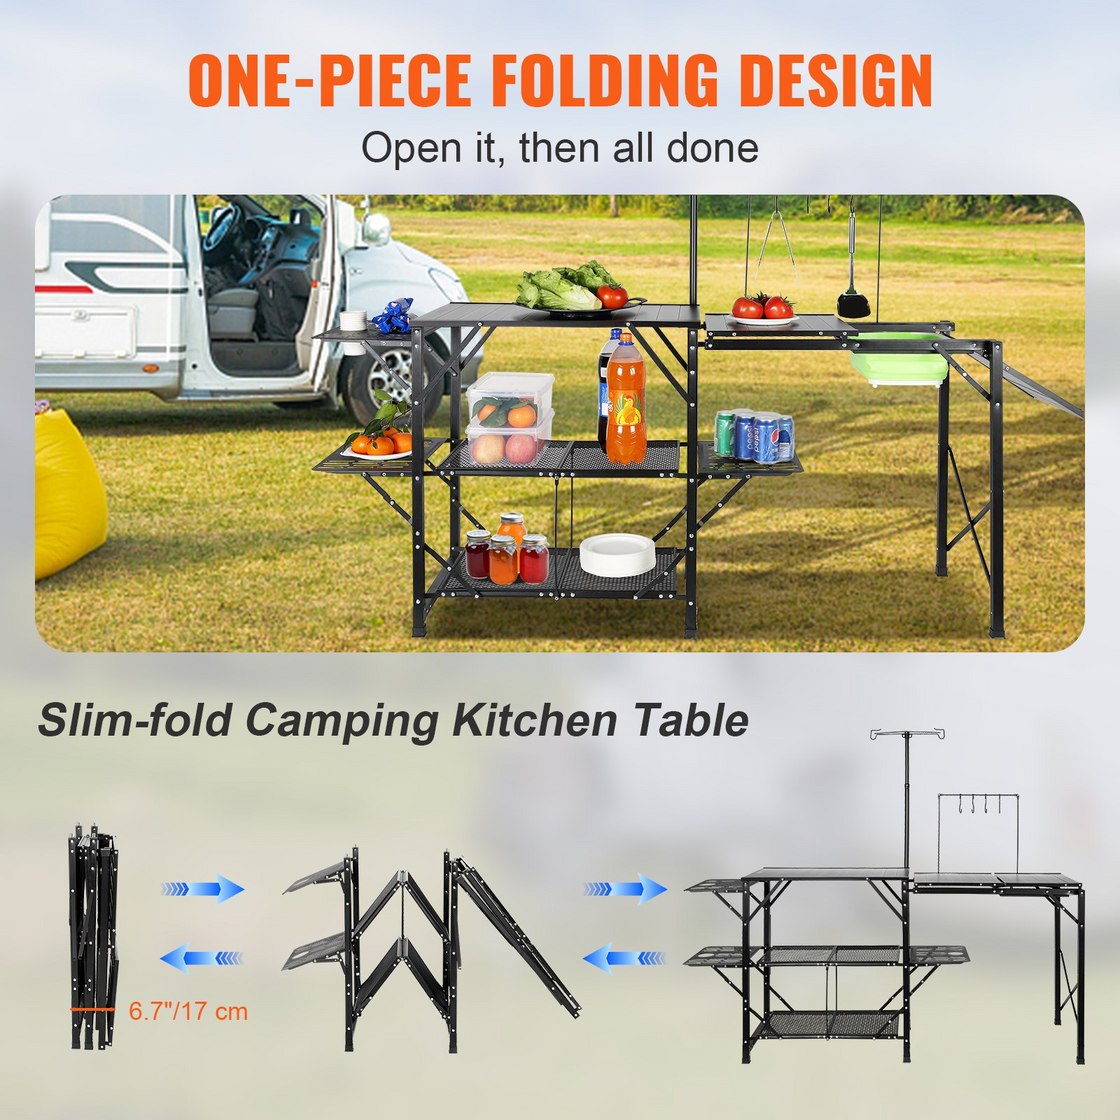 VEVOR Camping Kitchen Table, One-piece Folding Portable Cook Station with A Carrying Bag, Long Aluminum Camping Table 3 Side Tables, 2 Shelves & A Detachable Sink for Outdoor Picnics, BBQs, Camping